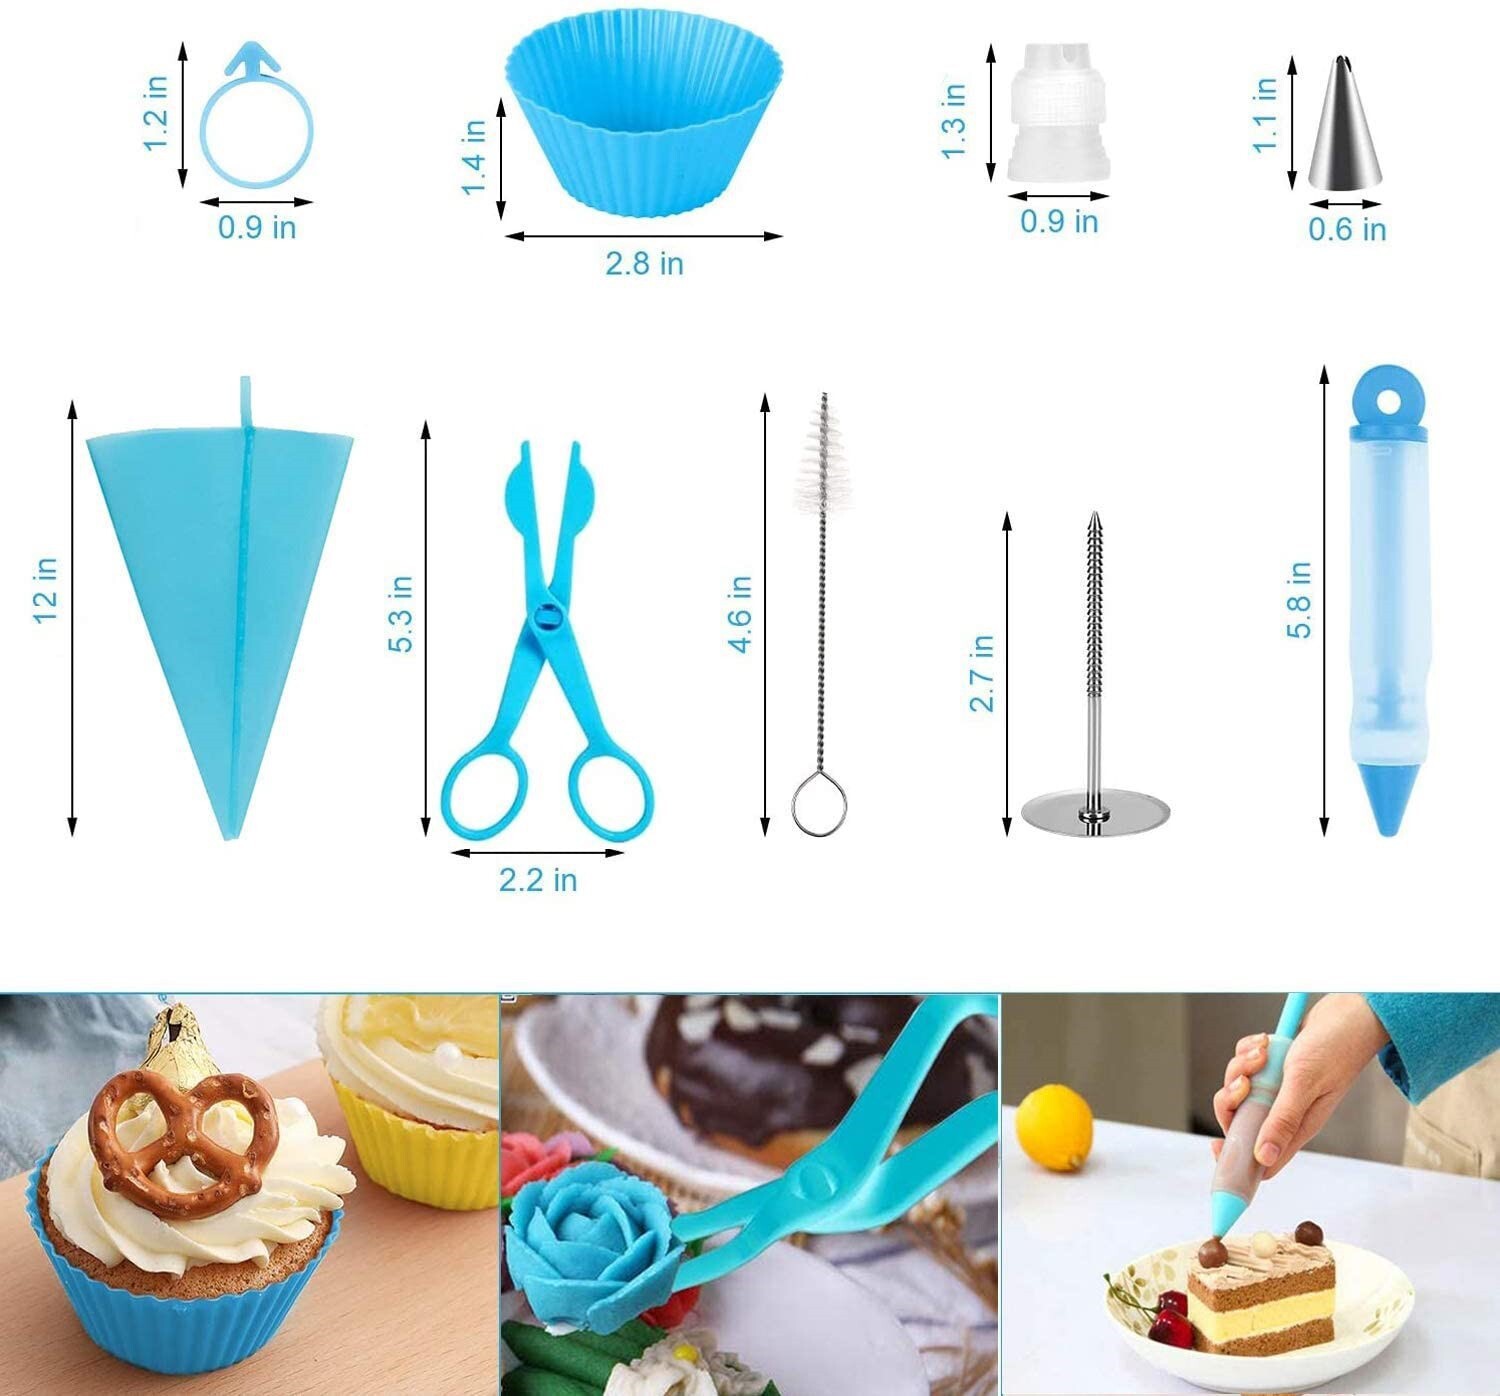 Piping Bags and Tips Set Cake Decorating Supplies for Baking 72 Pcs Cake  Decorating Set for Baking with Reusable Pastry Bags